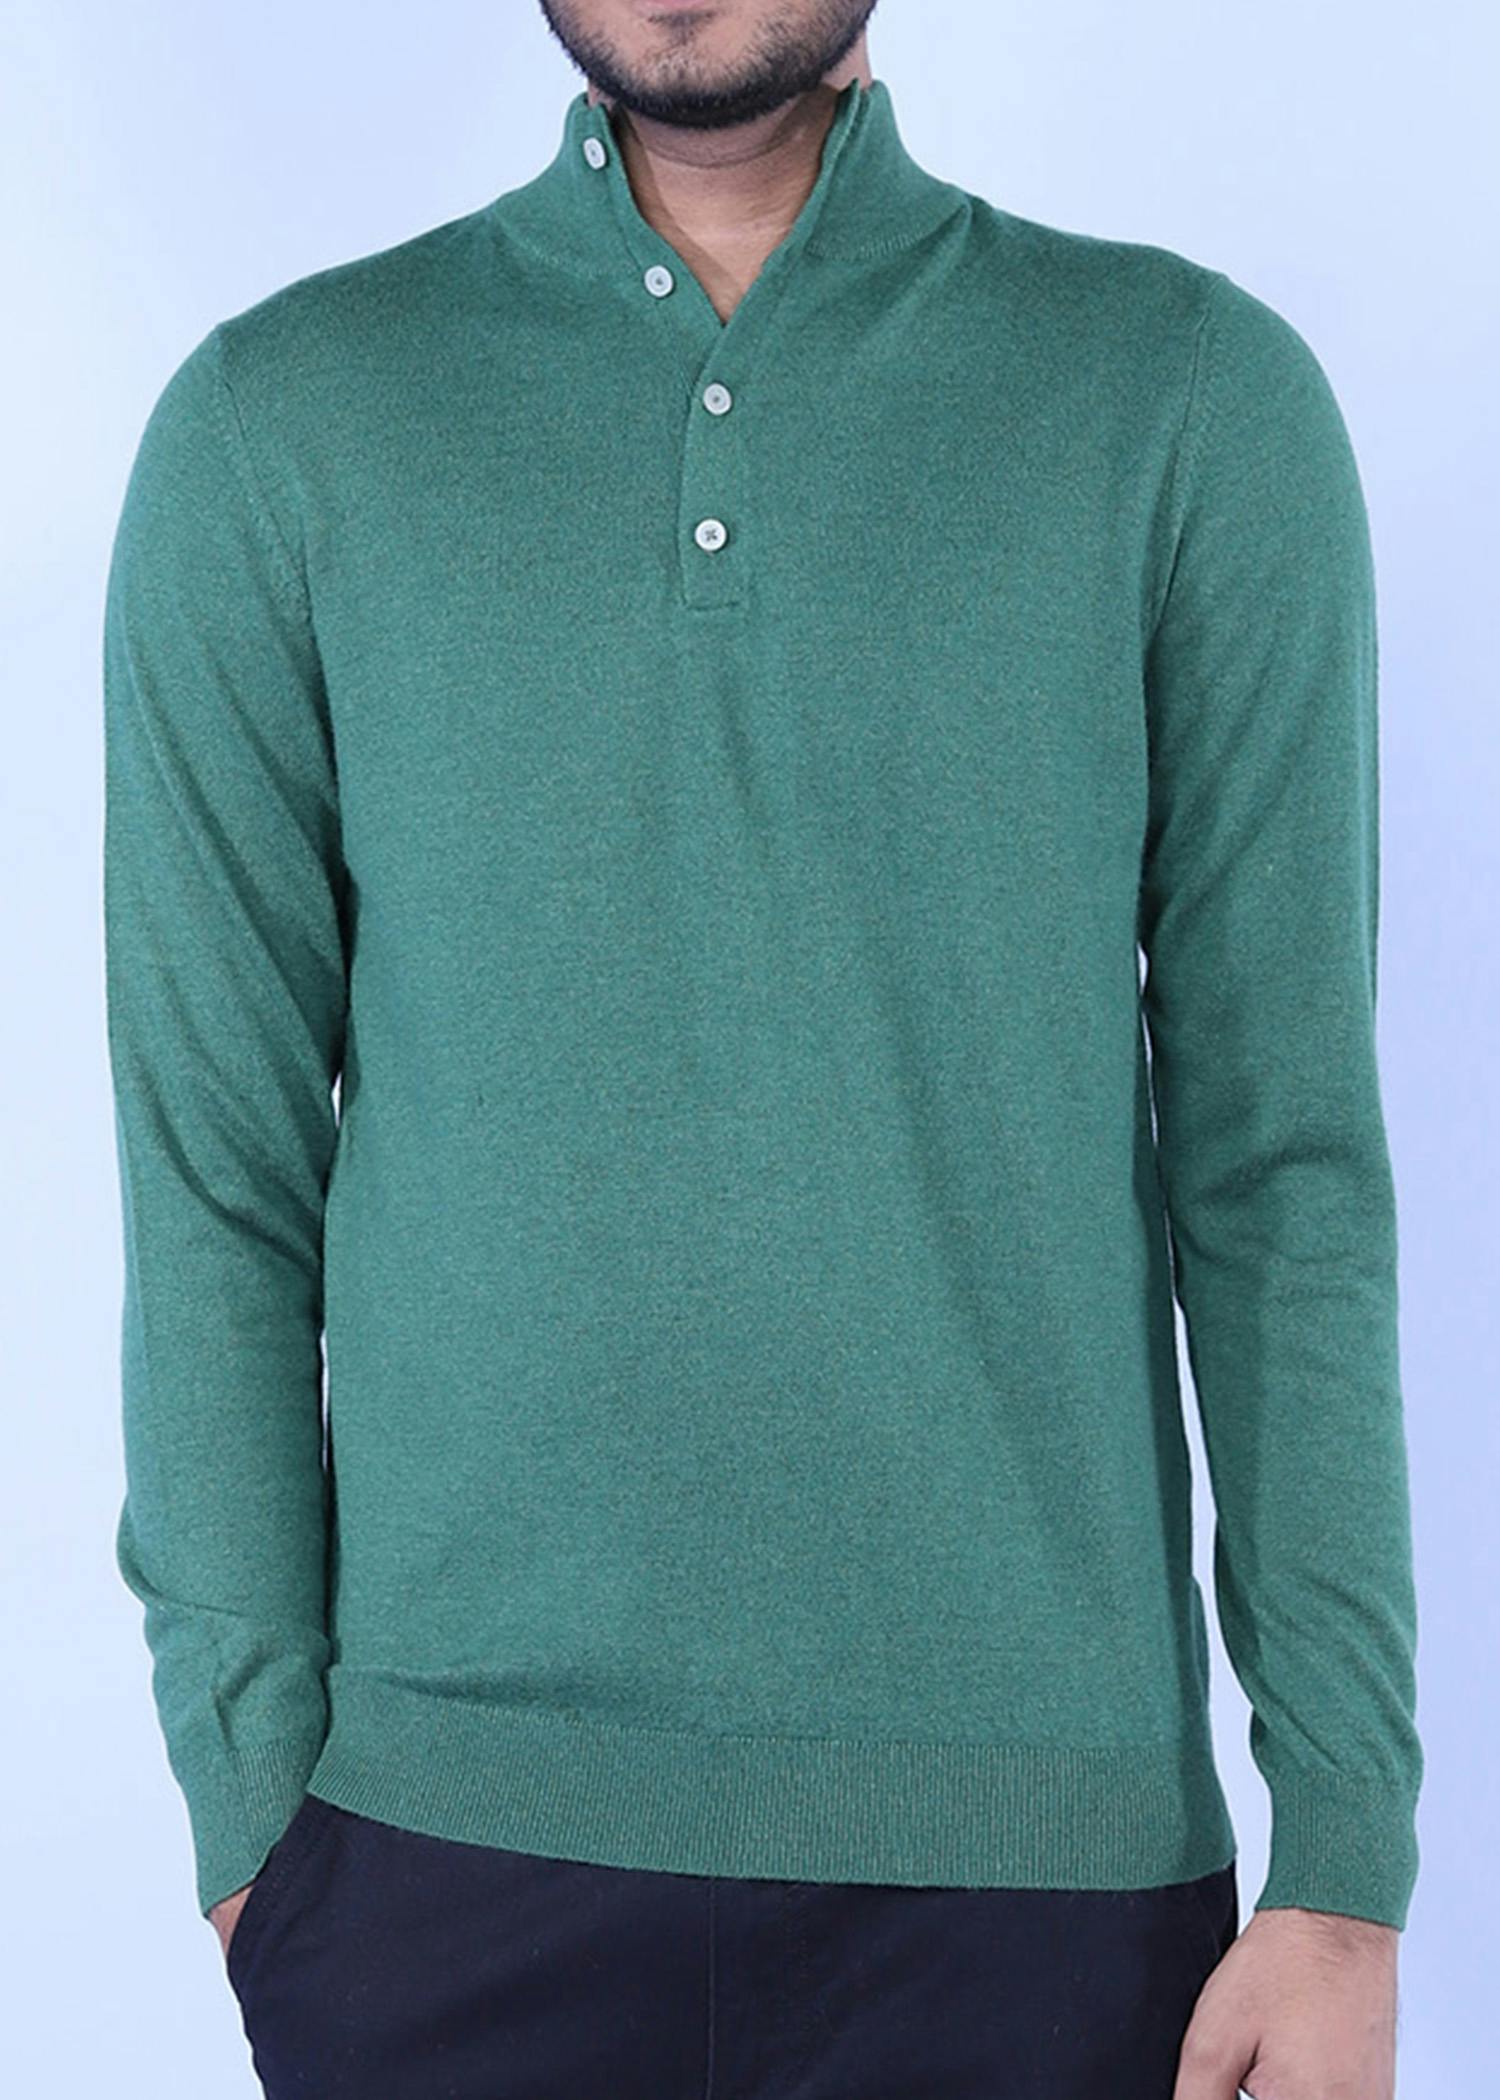 hornero i sweater green color headcropped